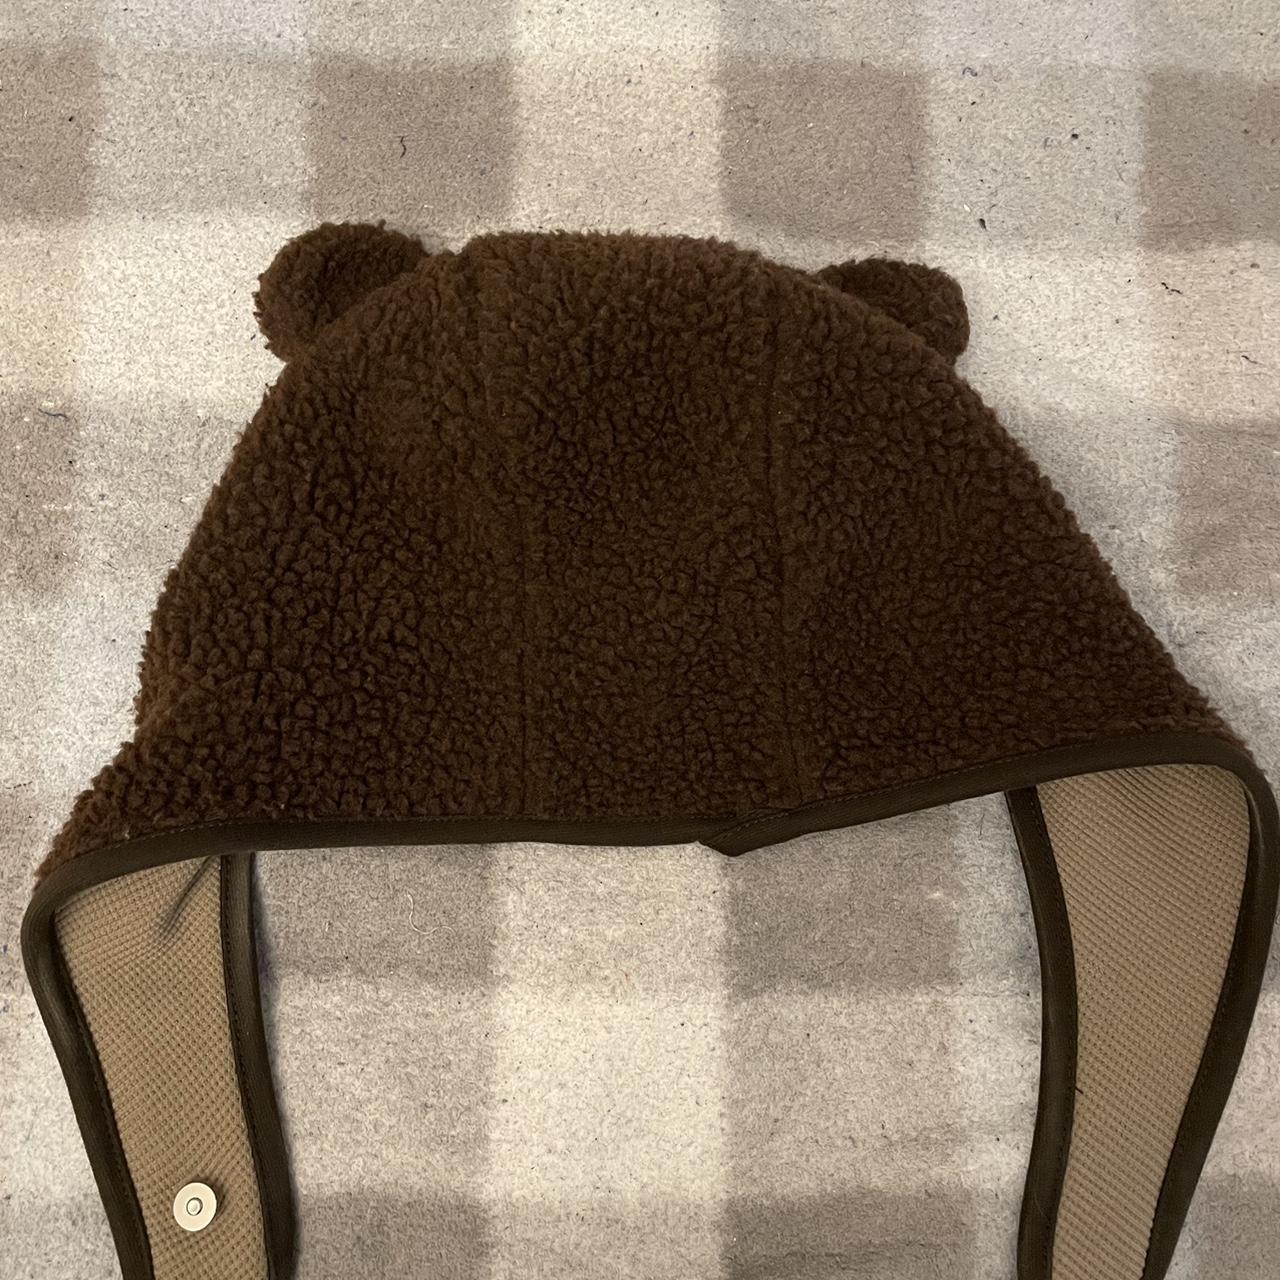 Hysteric Glamour Men's Brown Hat (2)